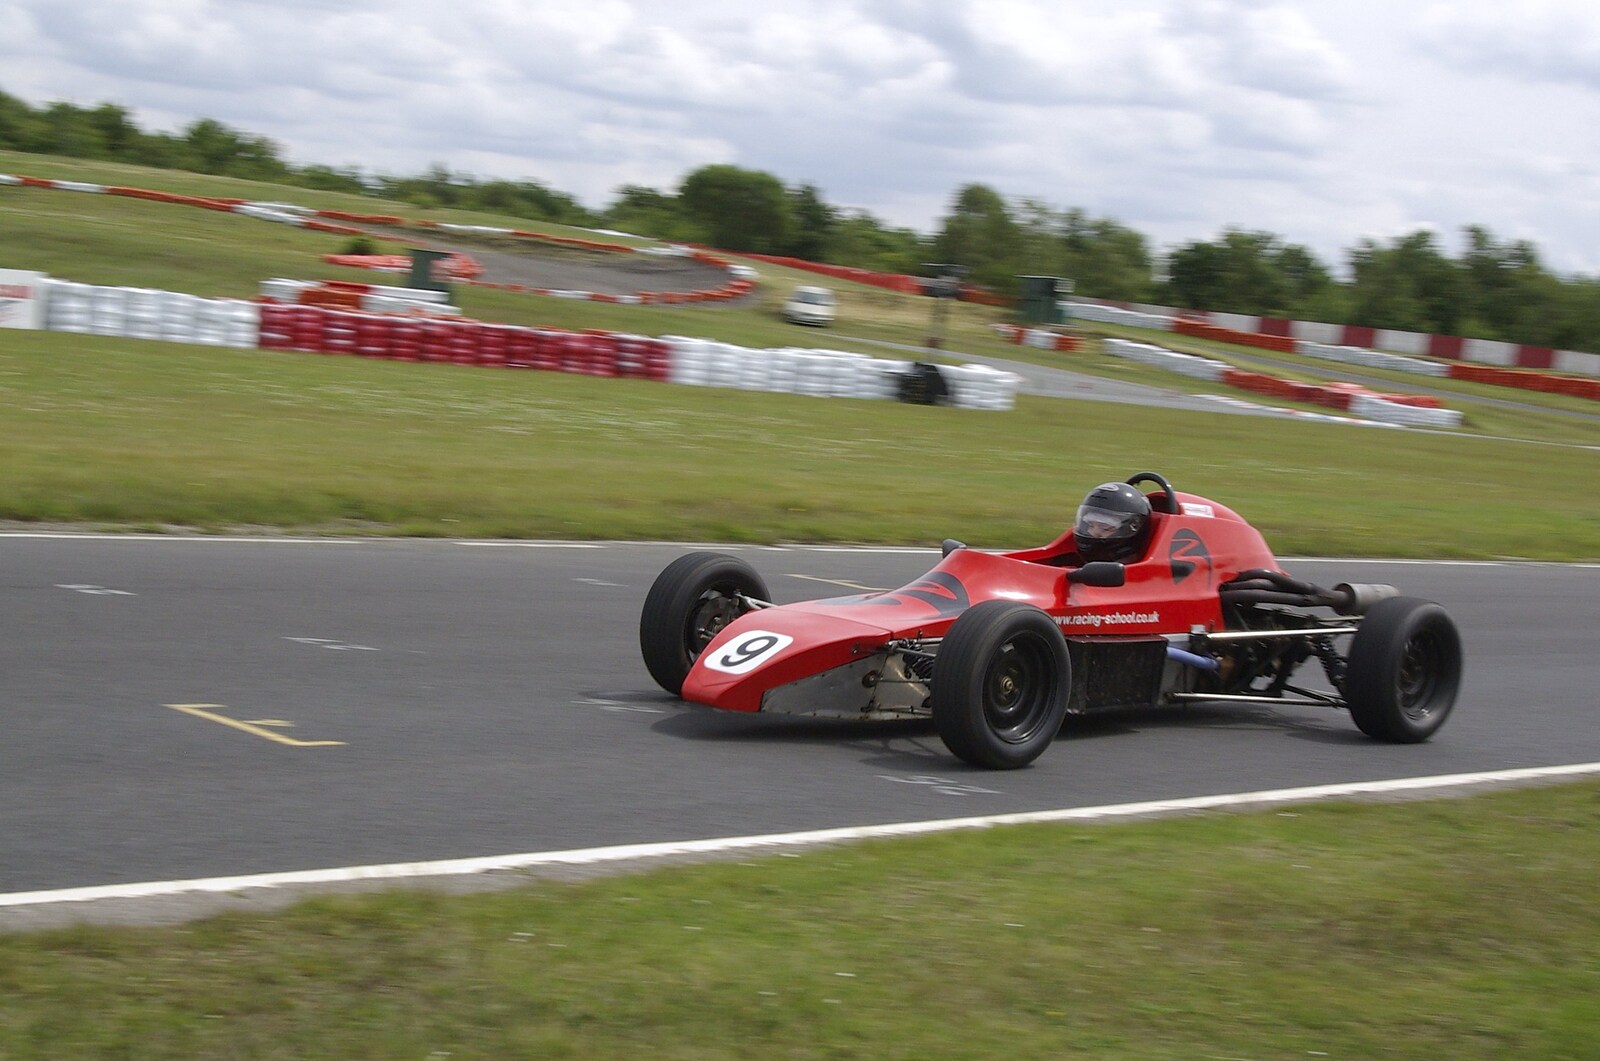 Driving a Racing Car, Three Sisters Racetrack, Wigan, Lancashire - 24th June 2008: Nosher speeds past the pits